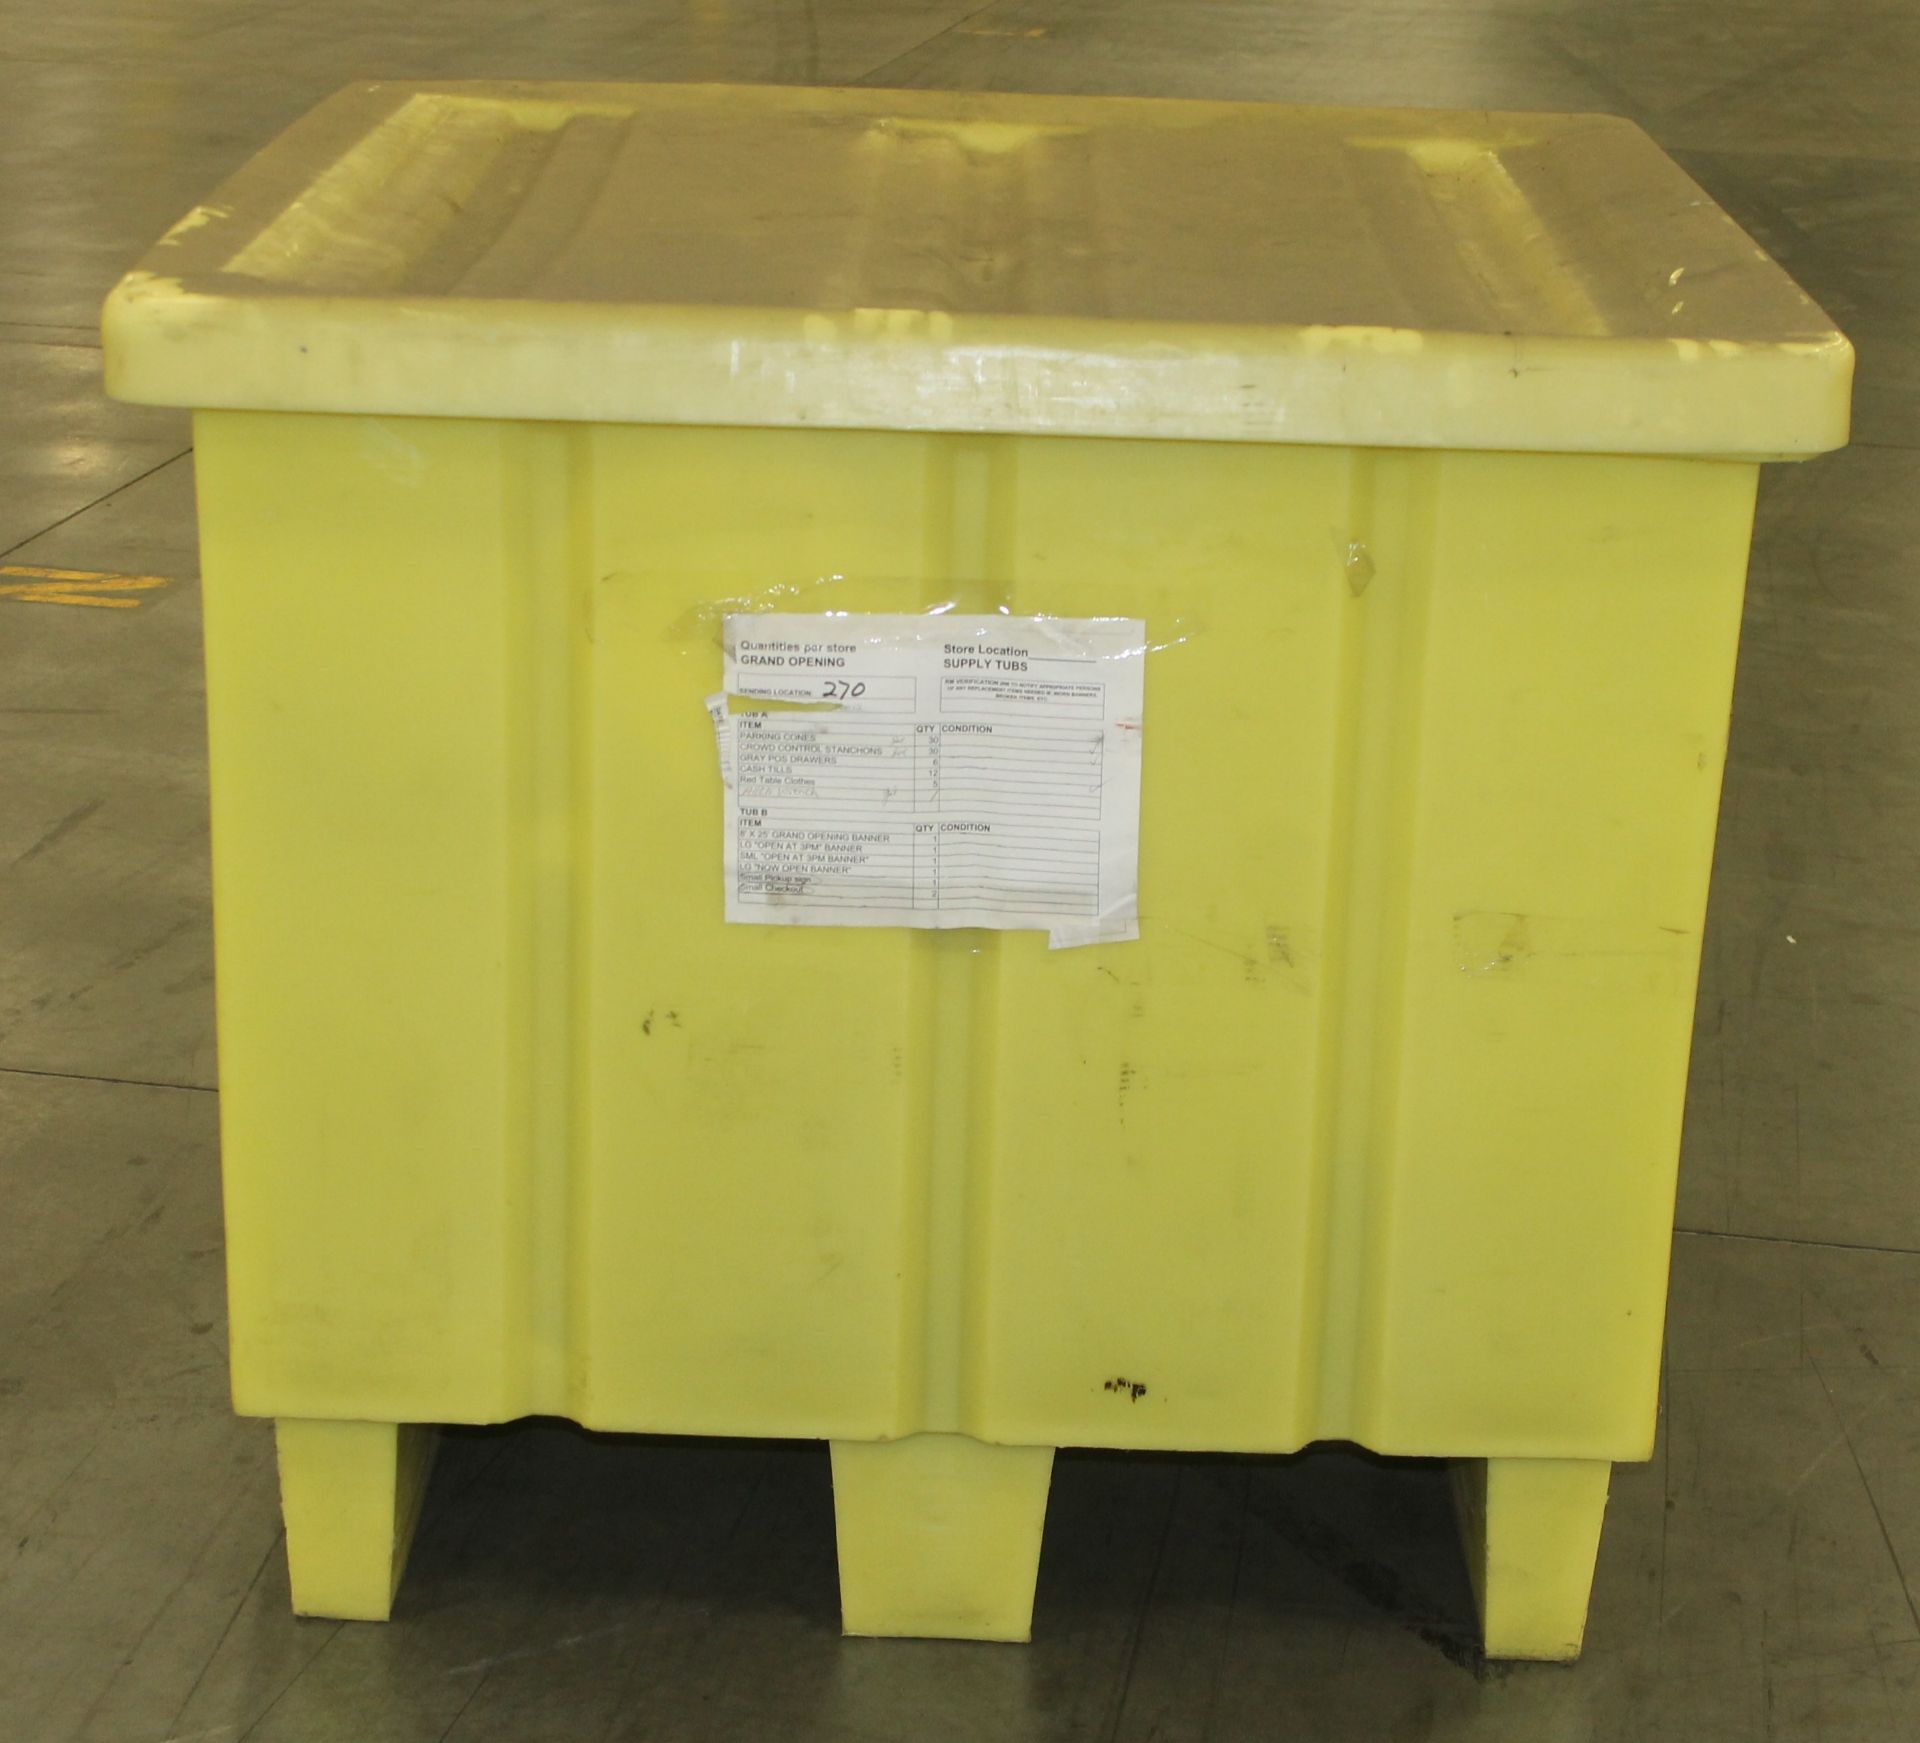 GLOBAL DANDUX PALLET CONTAINER WITH LID,